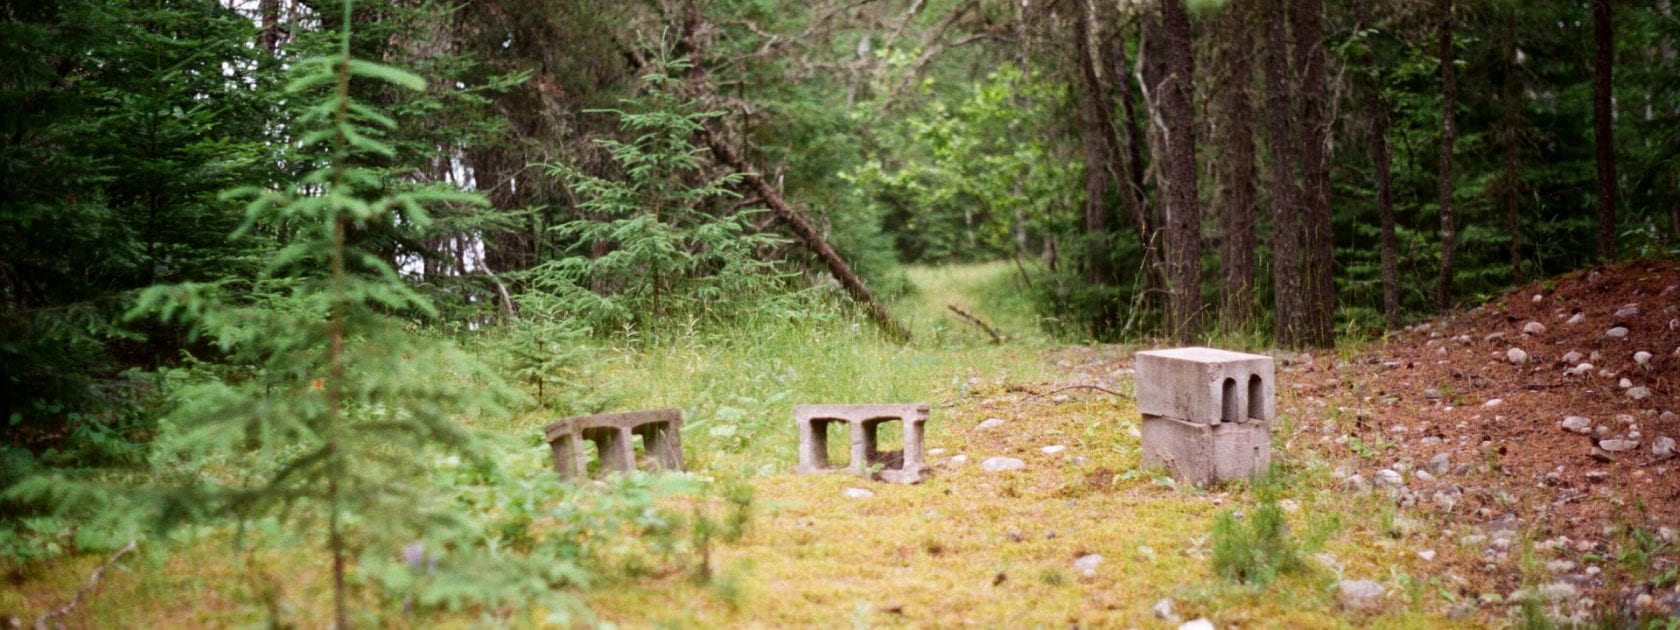 A photo of a path in a coniferous forest with green trees on either side of the path. There are brownish red needles and pale white stones lining the forest floor. Four cement blocks are scattered, or perhaps placed, in front of the path.